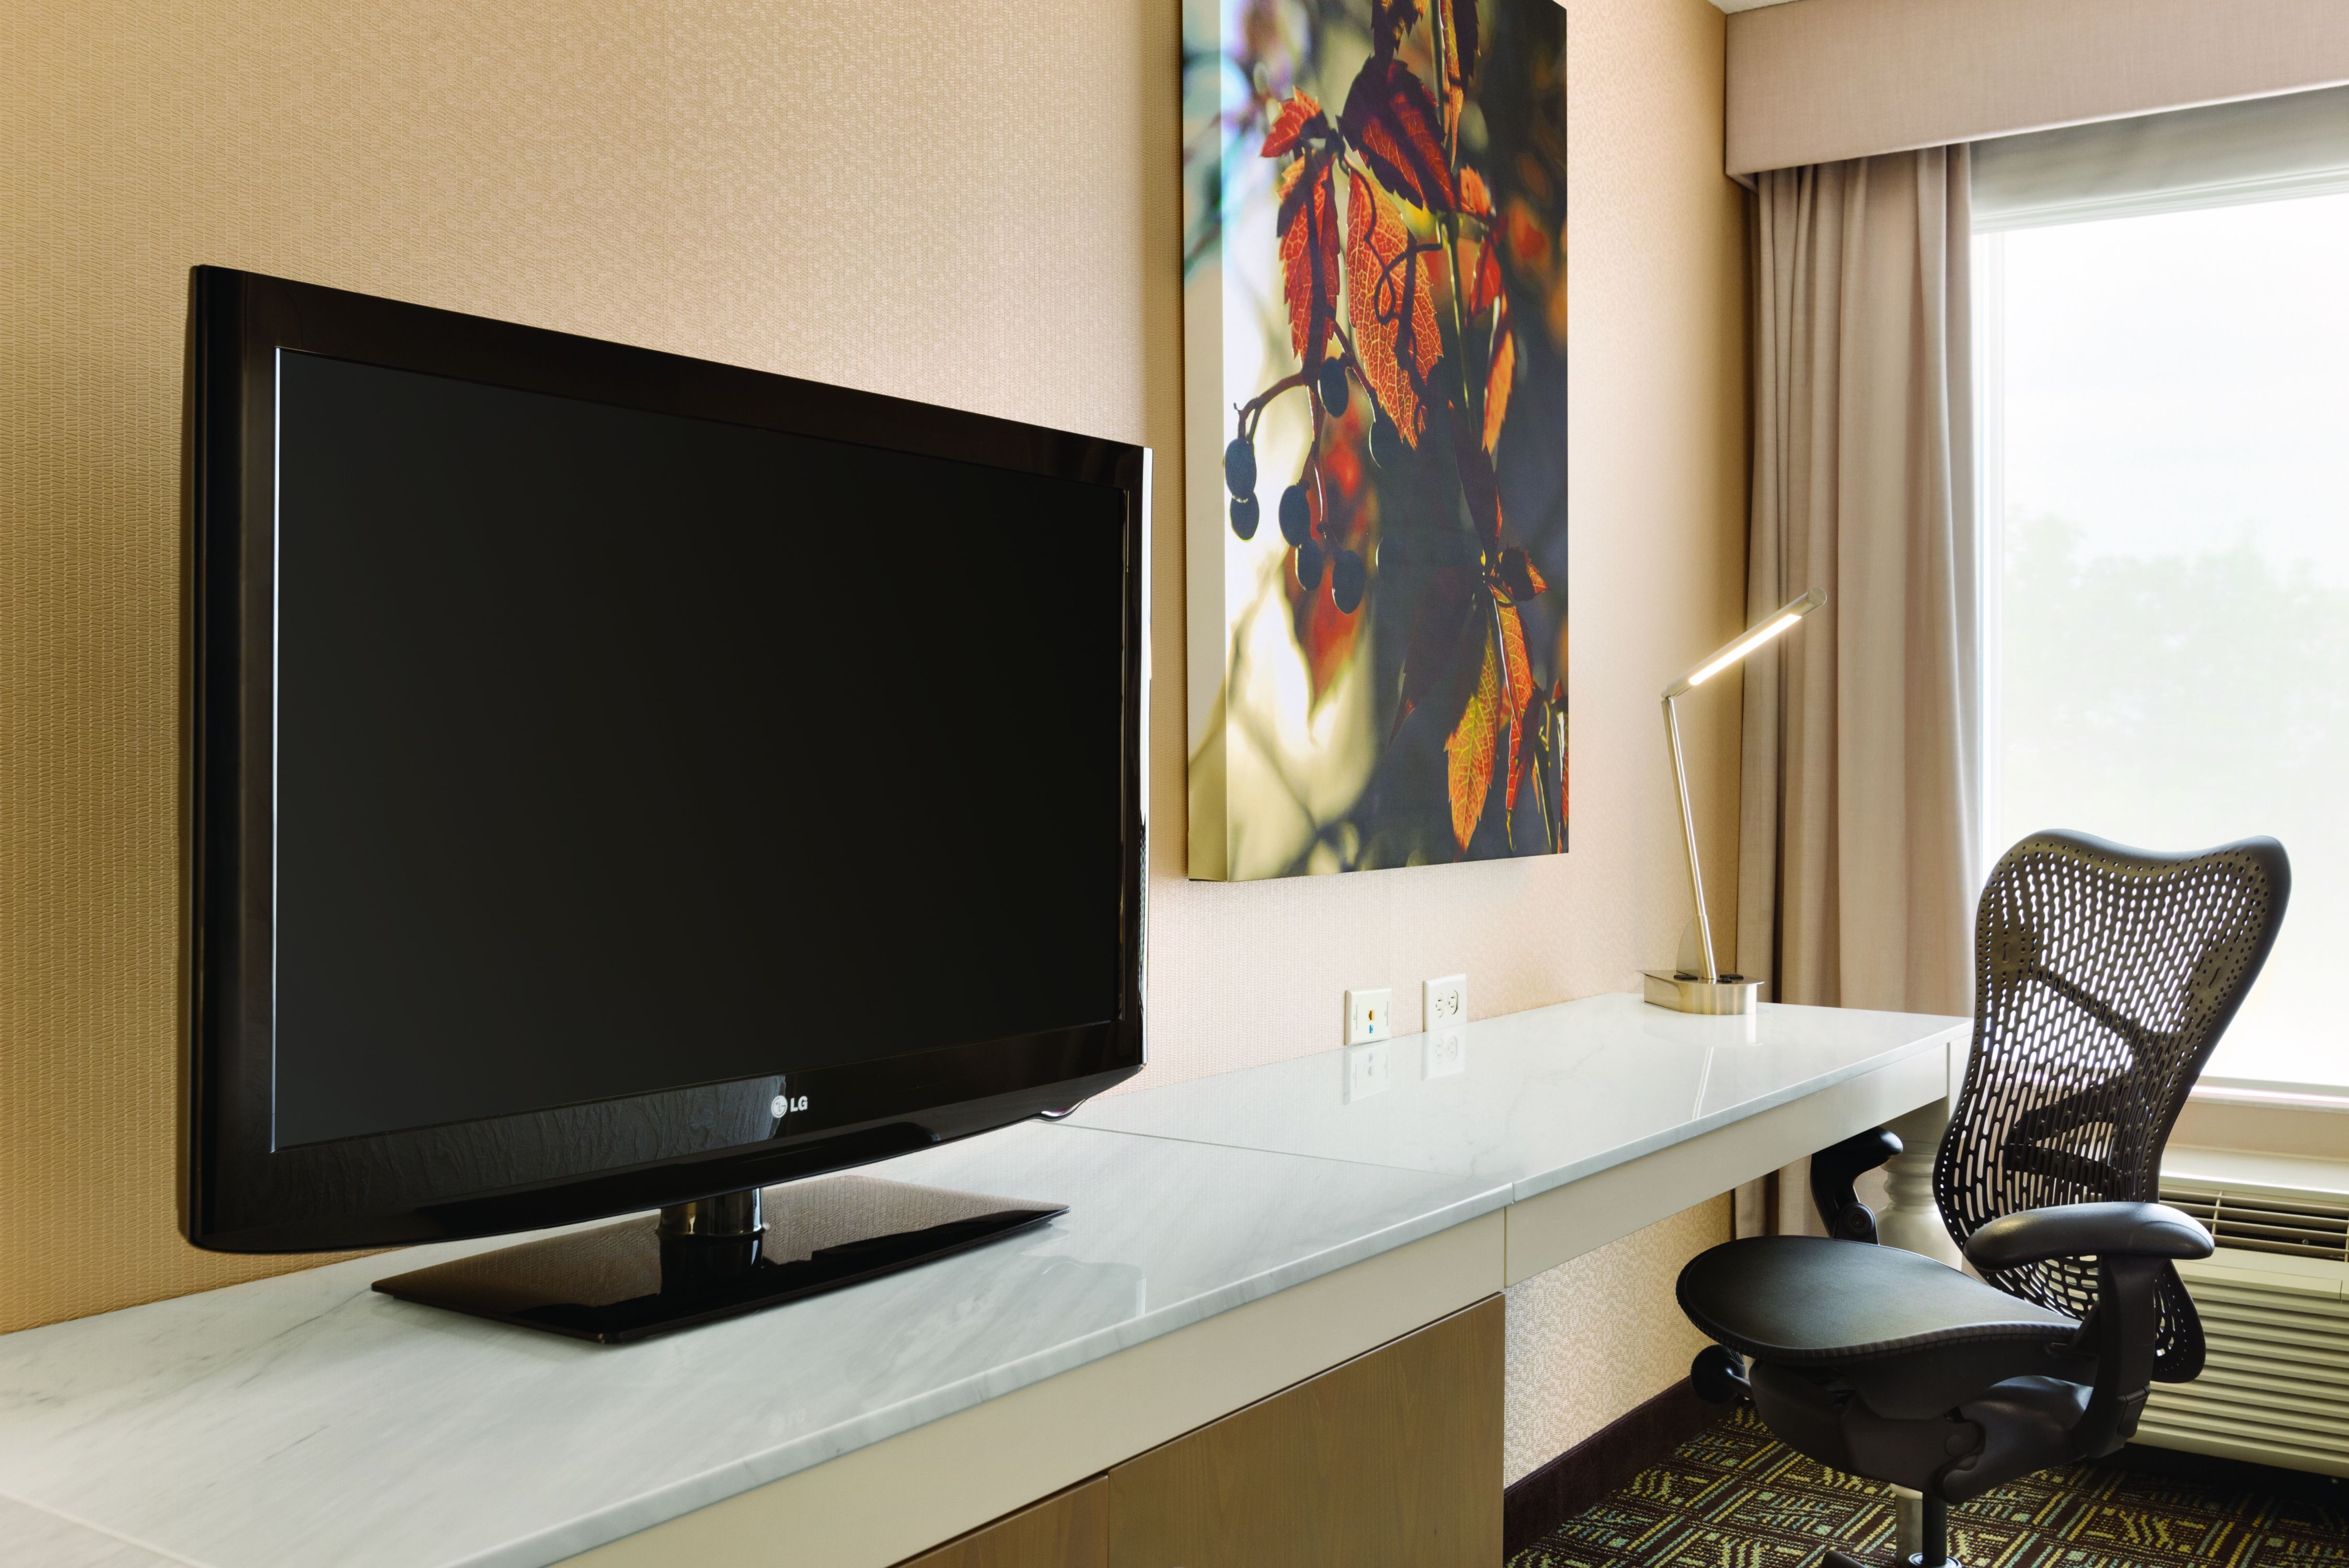 TV, Wall Art, and Desk With Ergonomic Chair by Window With Open Drapes